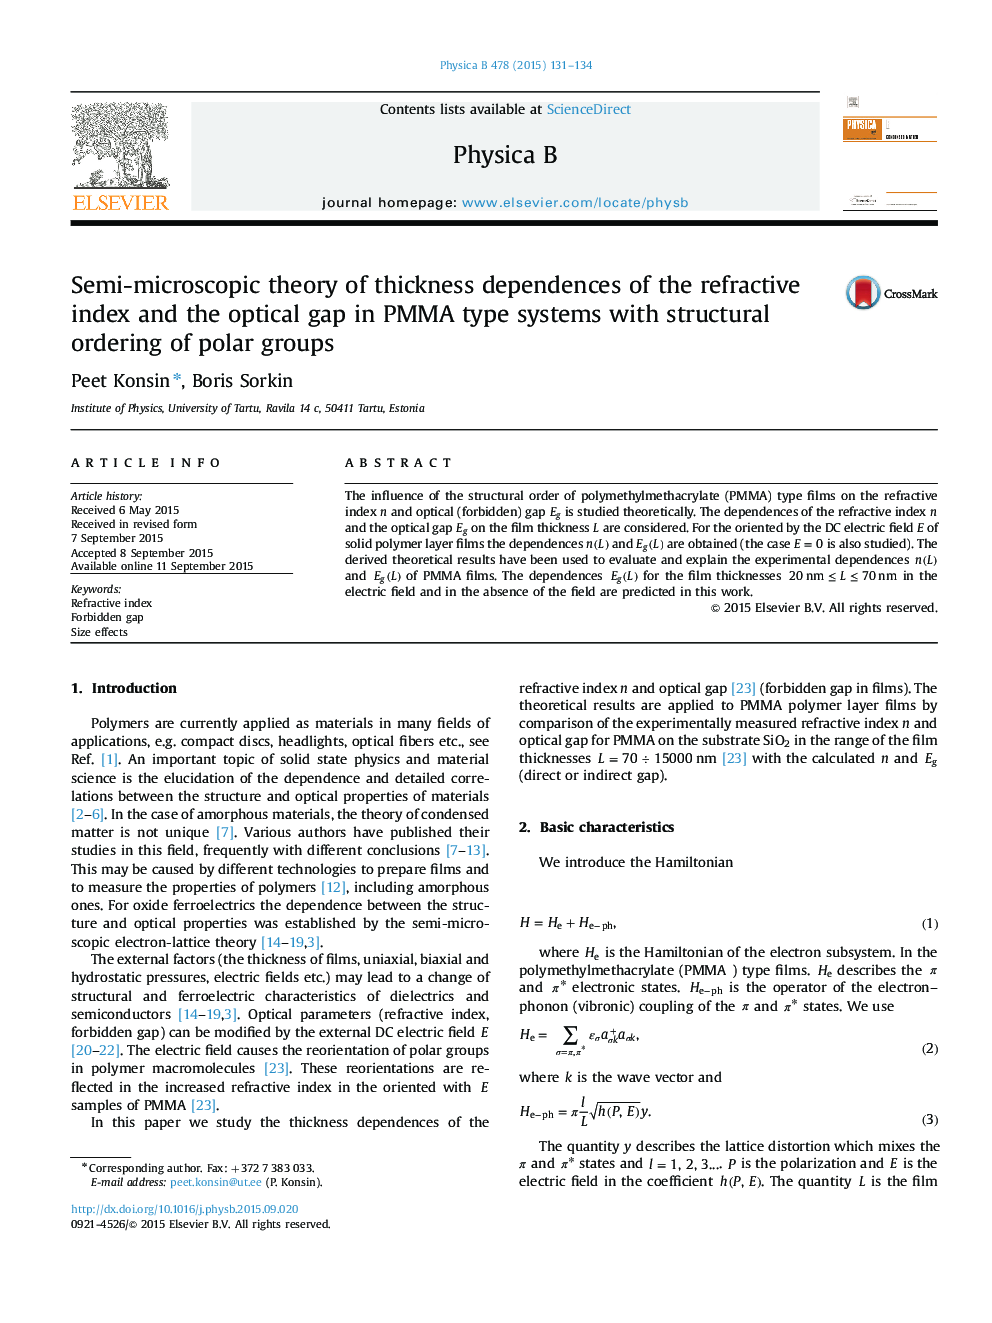 Semi-microscopic theory of thickness dependences of the refractive index and the optical gap in PMMA type systems with structural ordering of polar groups